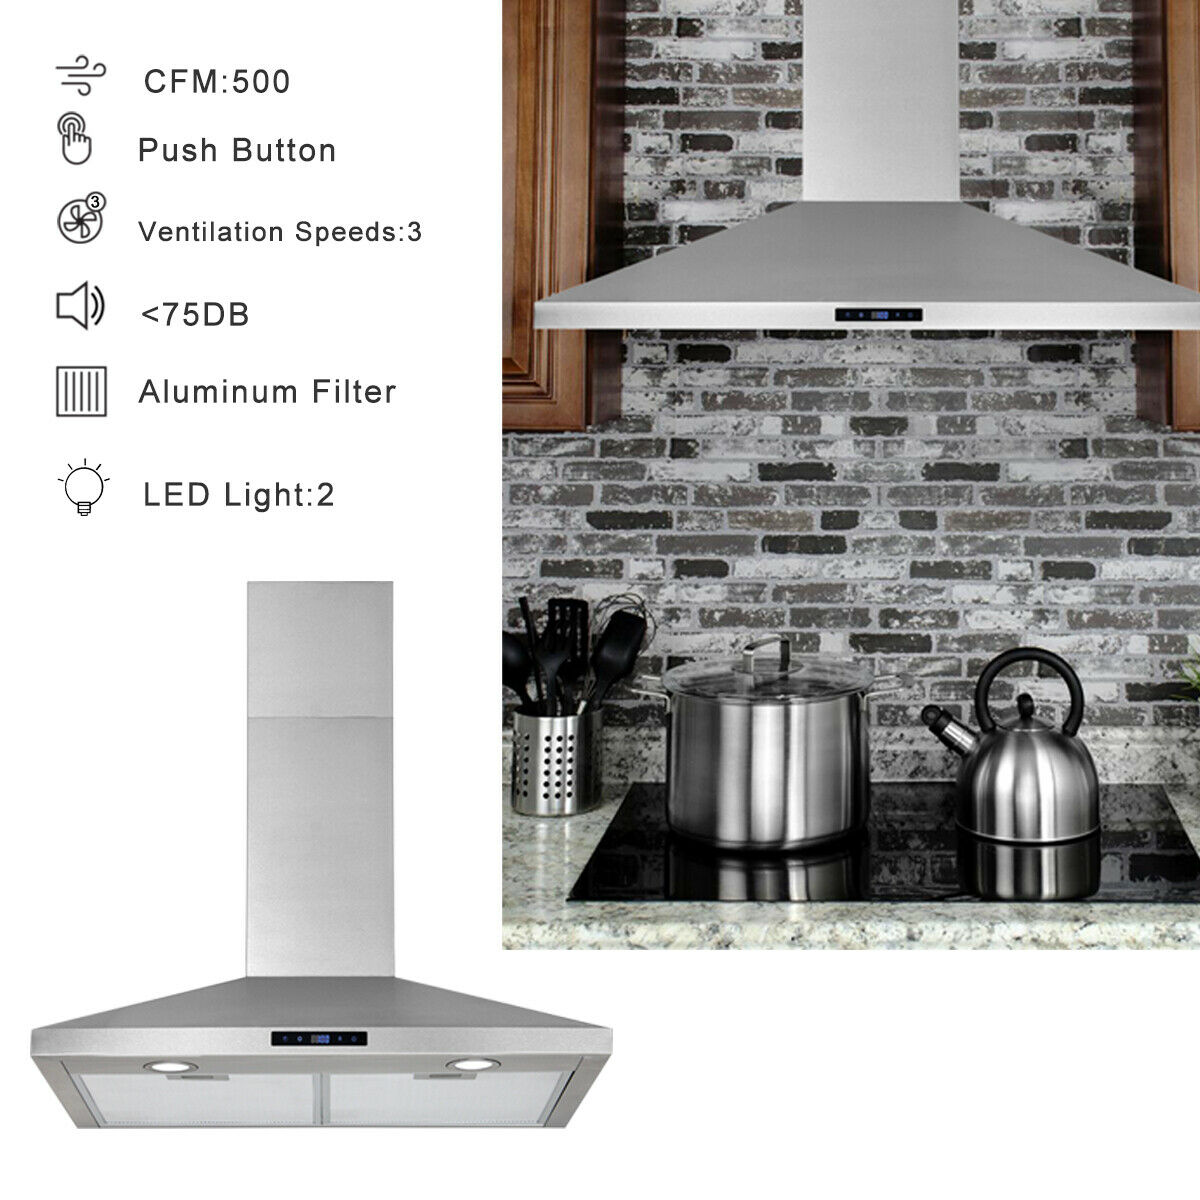 30" Wall Mount Range Hood Stainless Steel Top Vent Filter Touch Control 500 Cfm